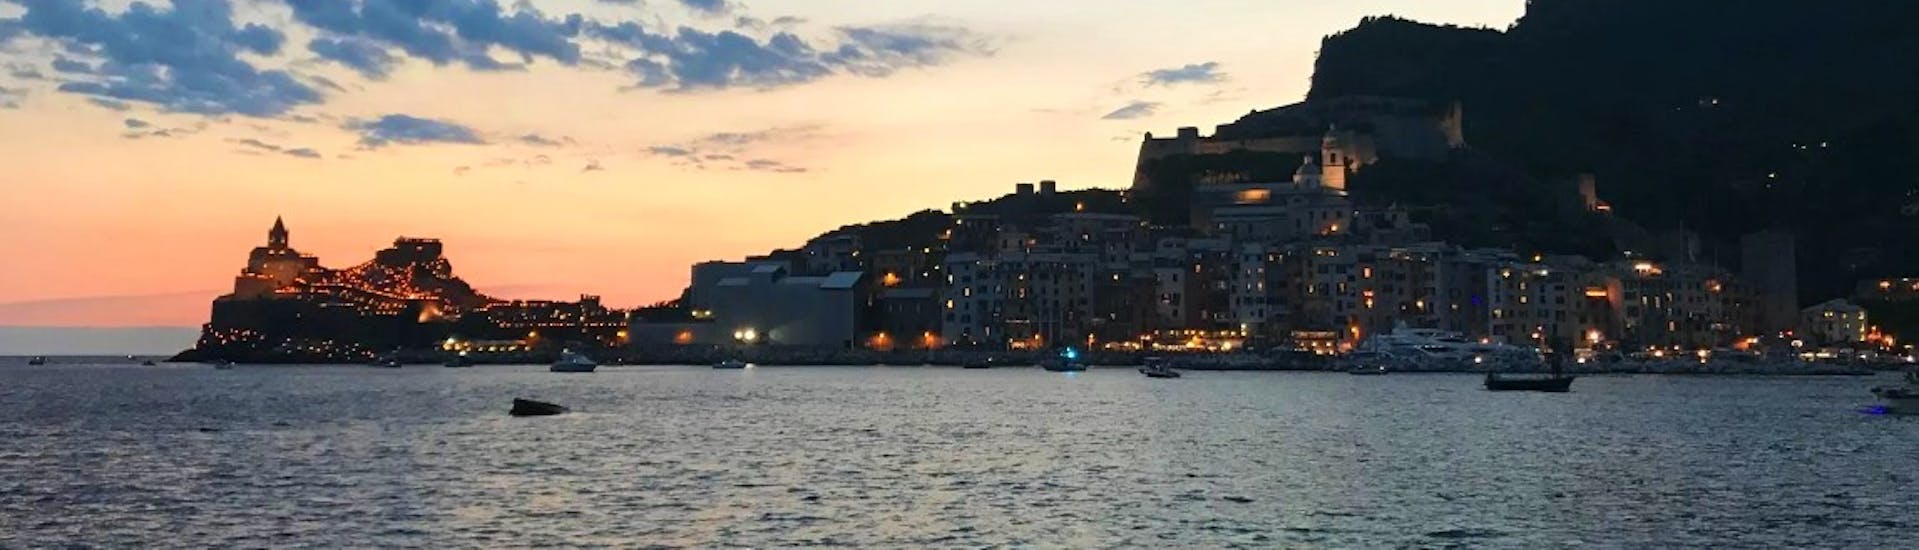 View of the Golfo dei Poeti after sunset during the RIB sunset trip with apéritif by HopHop Boat La Spezia.